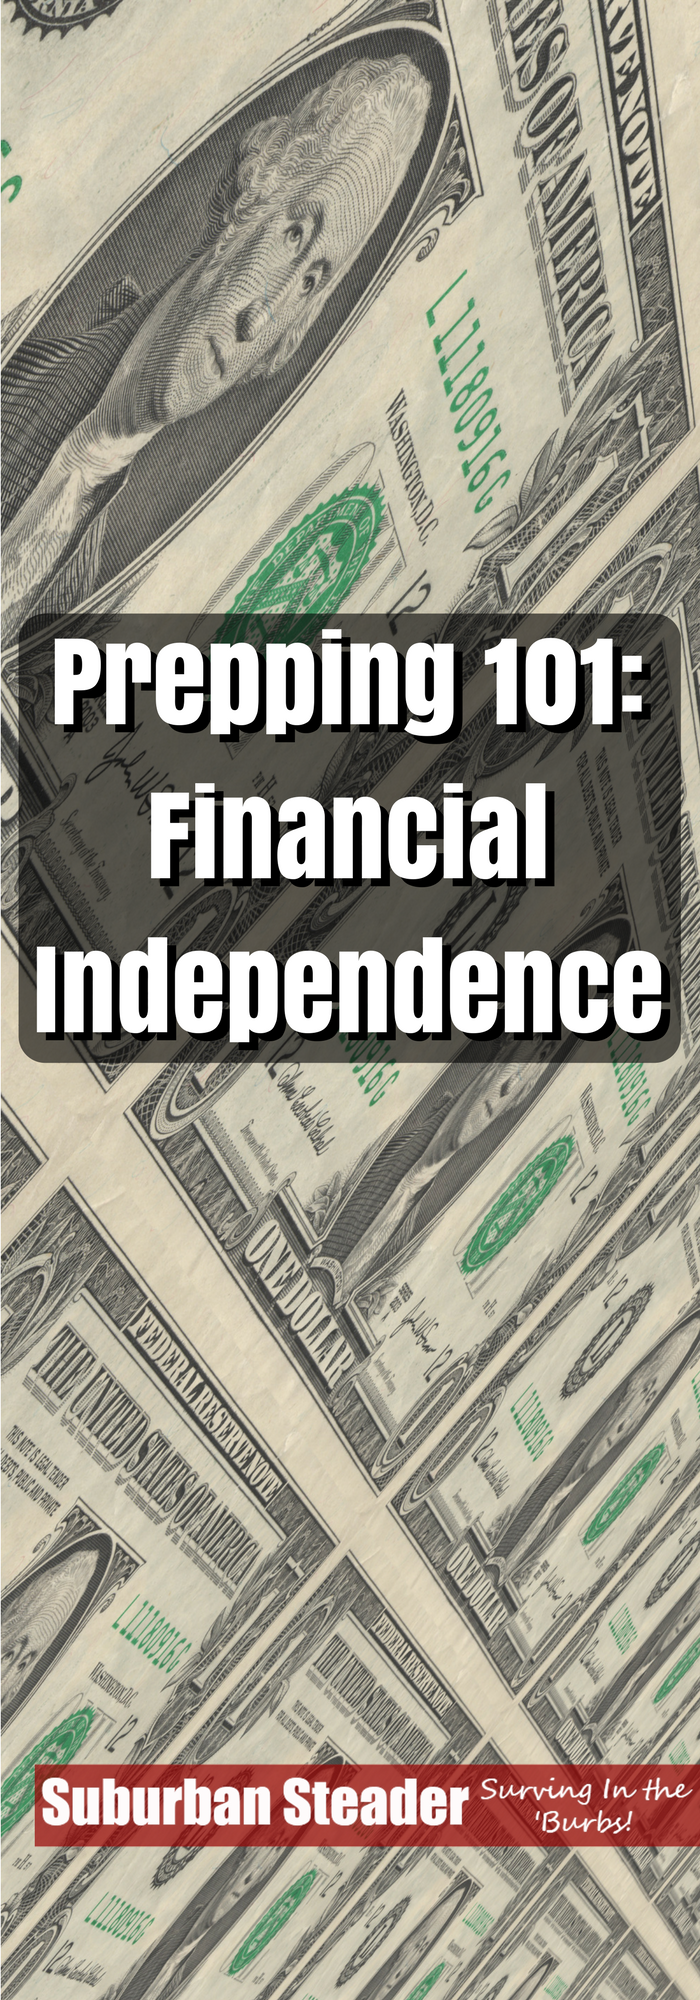 Prepping 101: Financial Independence